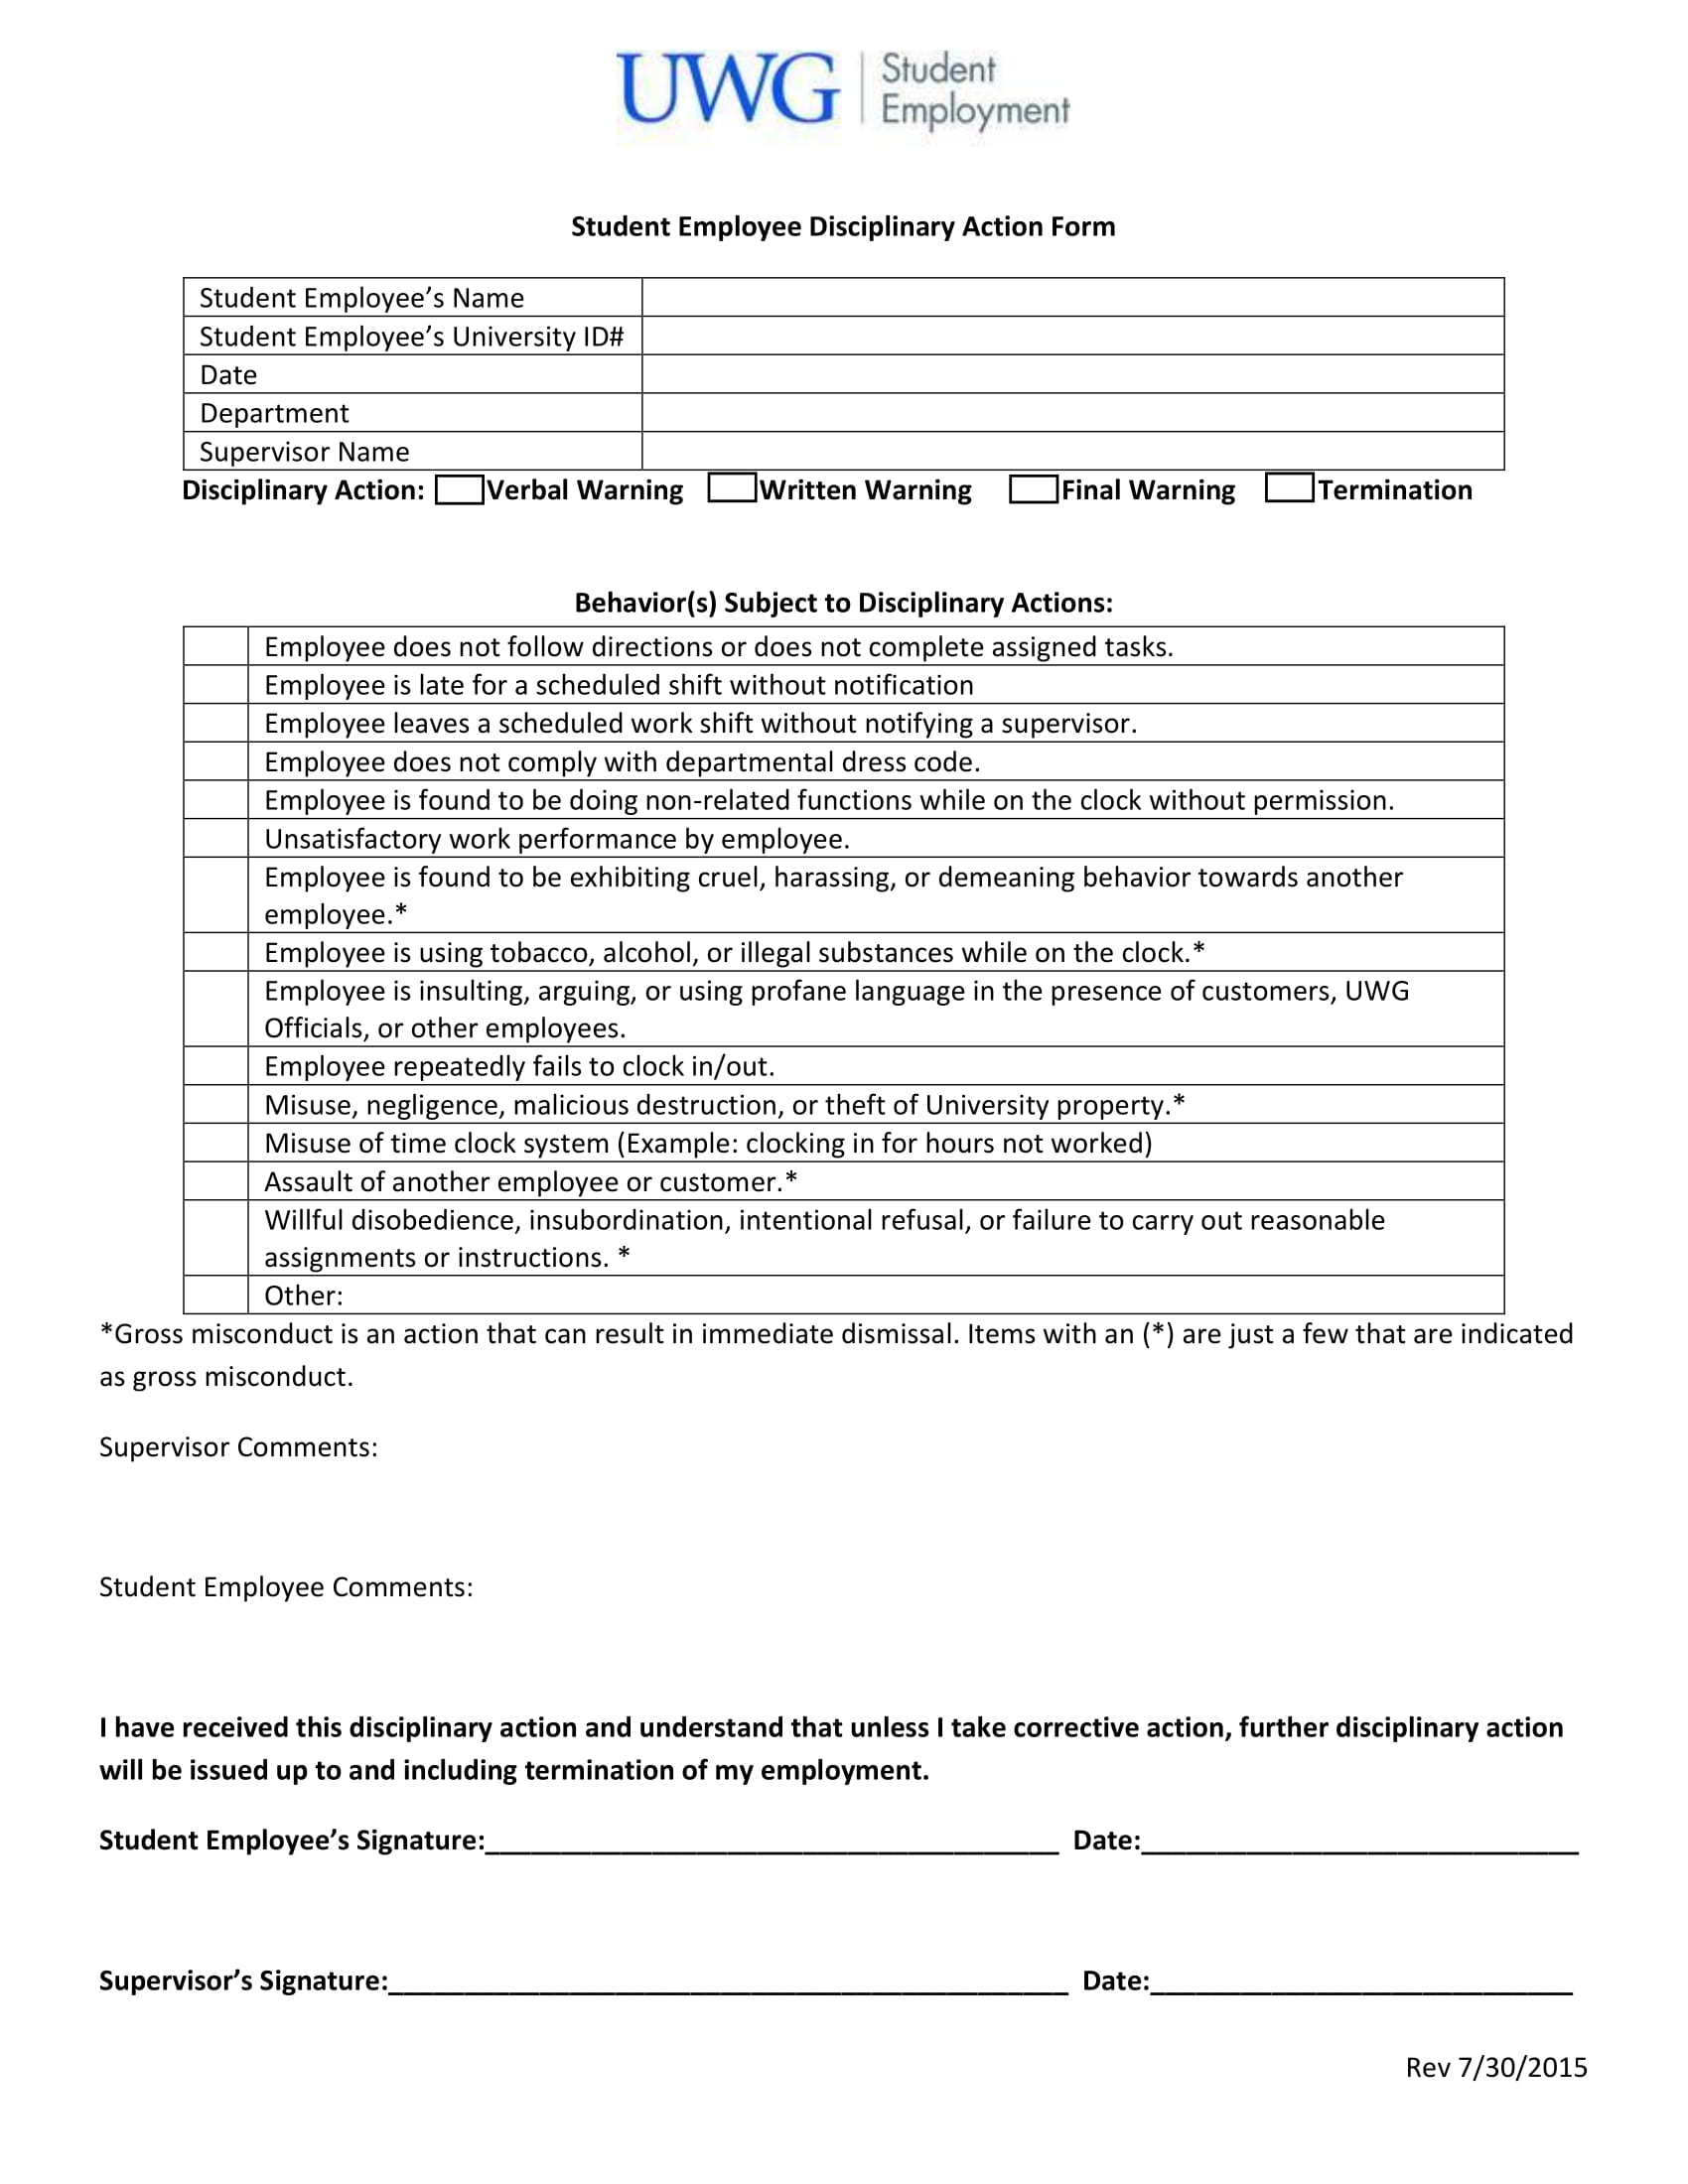 student employee disciplinary action form